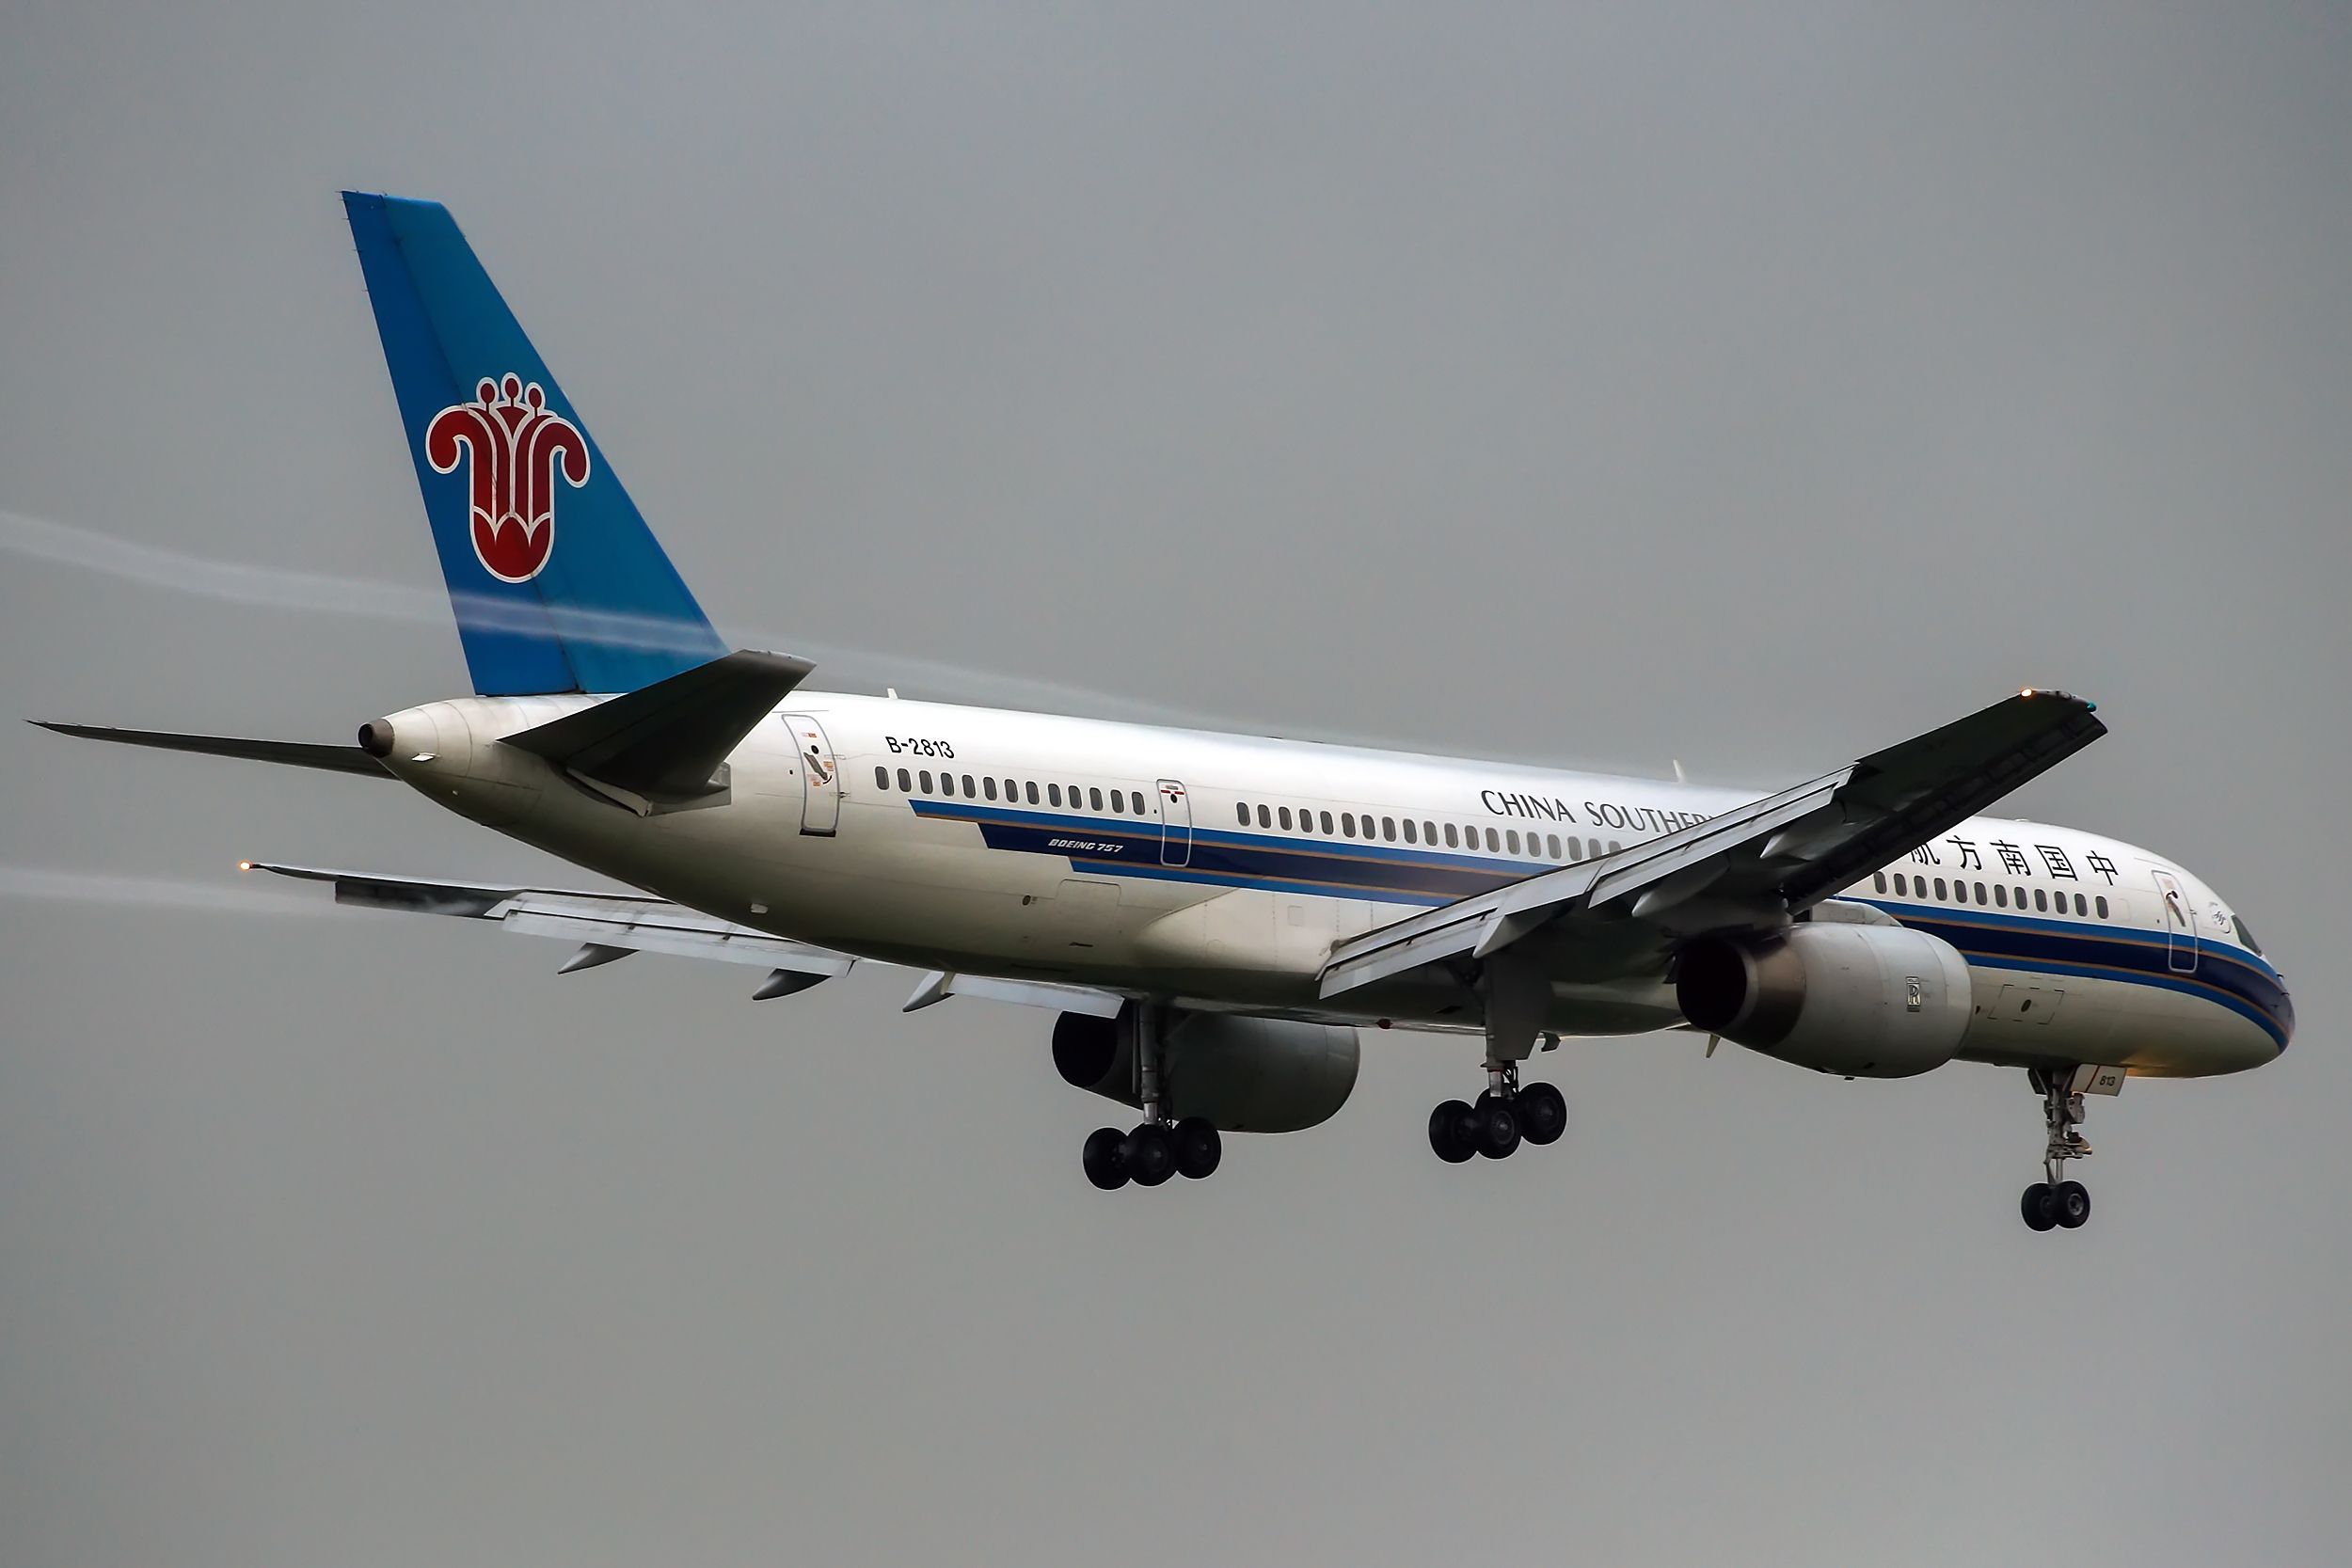 A China Southern Boeing 757 flying in the sky.